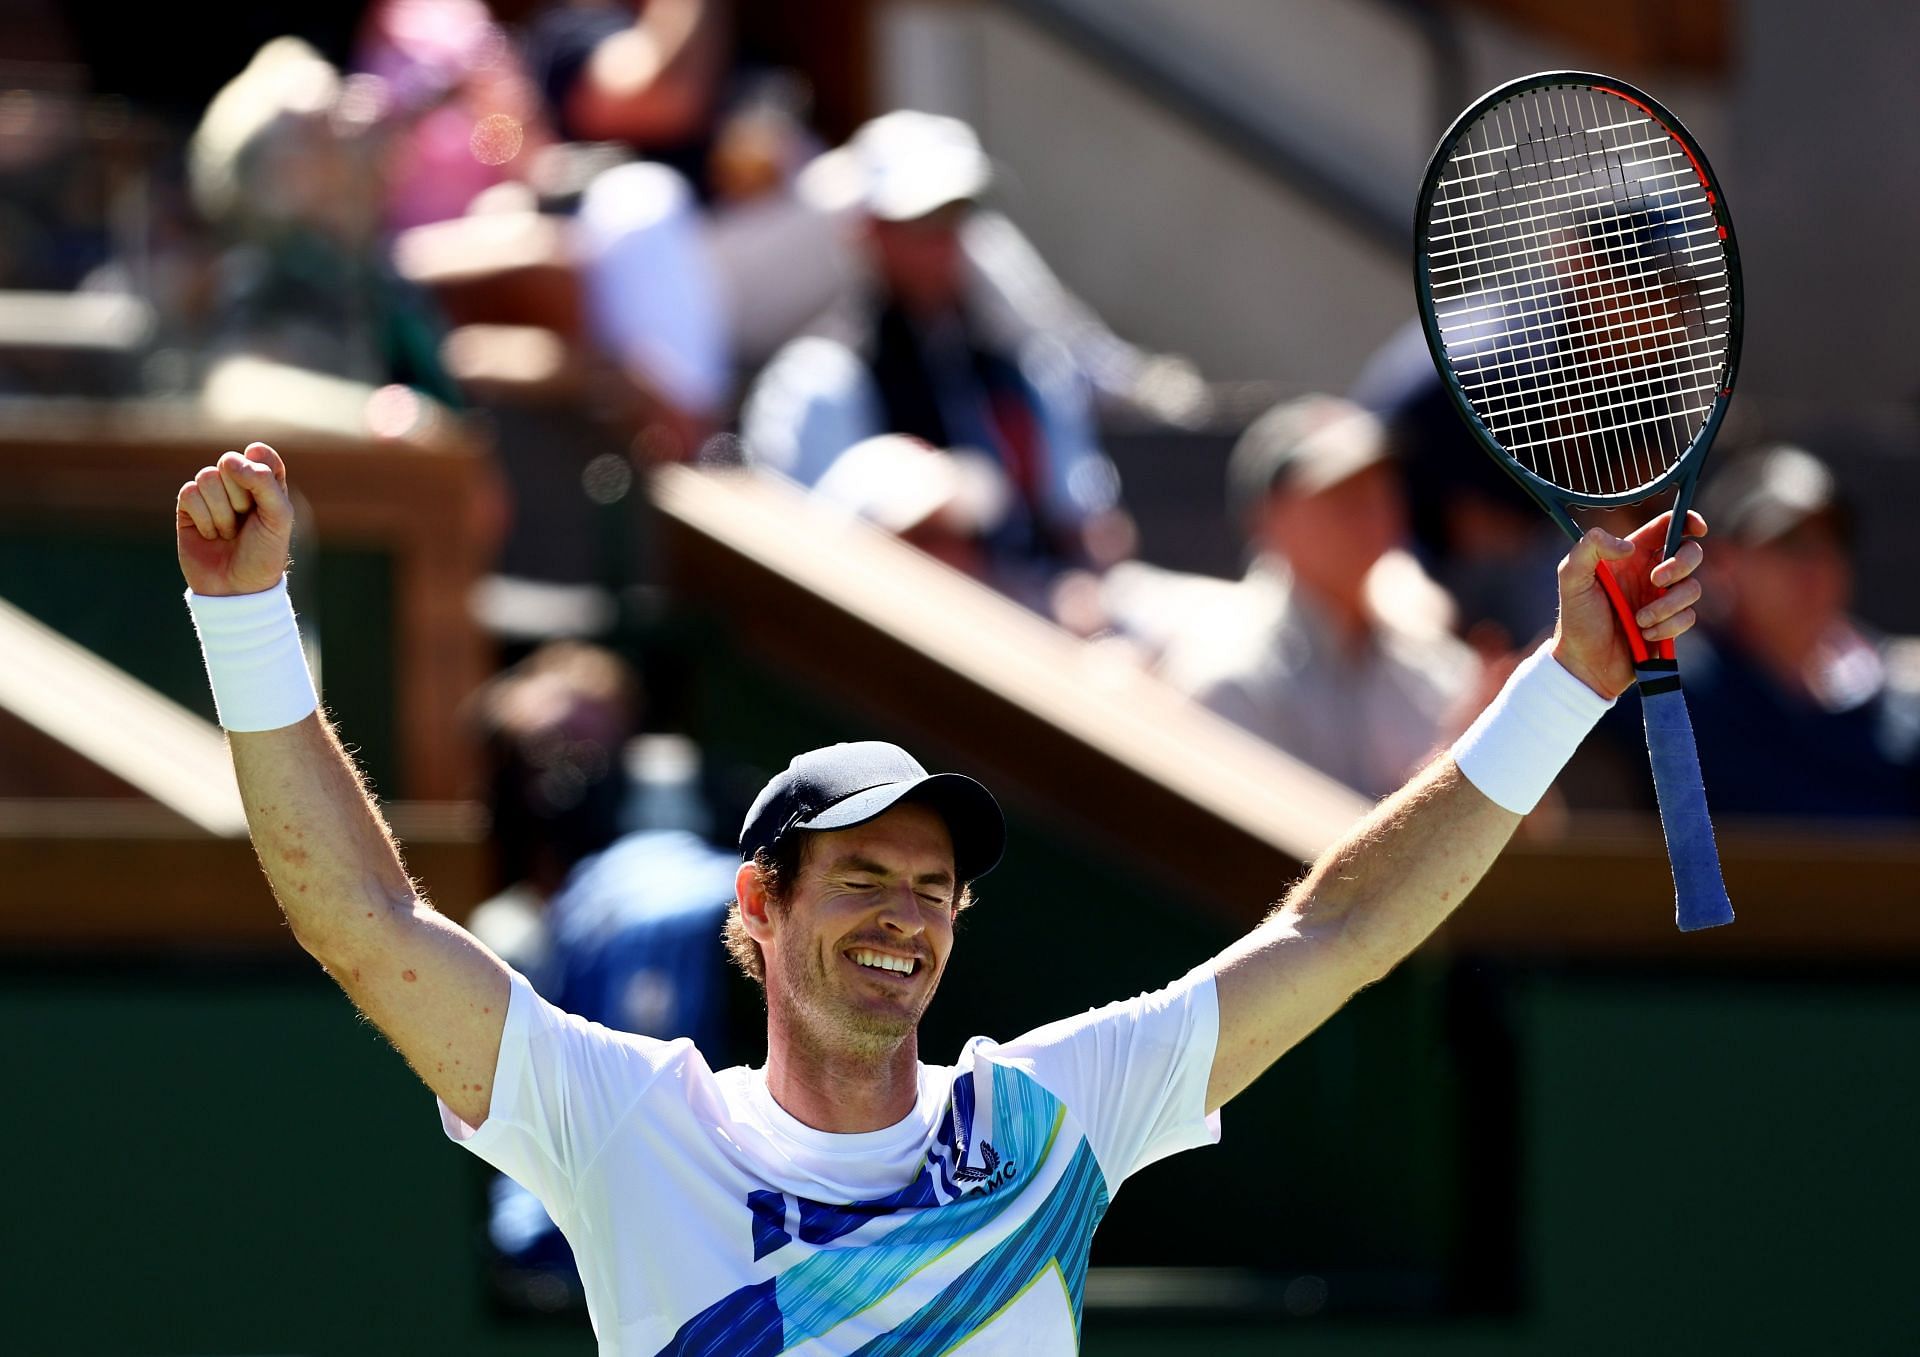 Andy Murray sealed his 700th career win by beating Taro Daniel